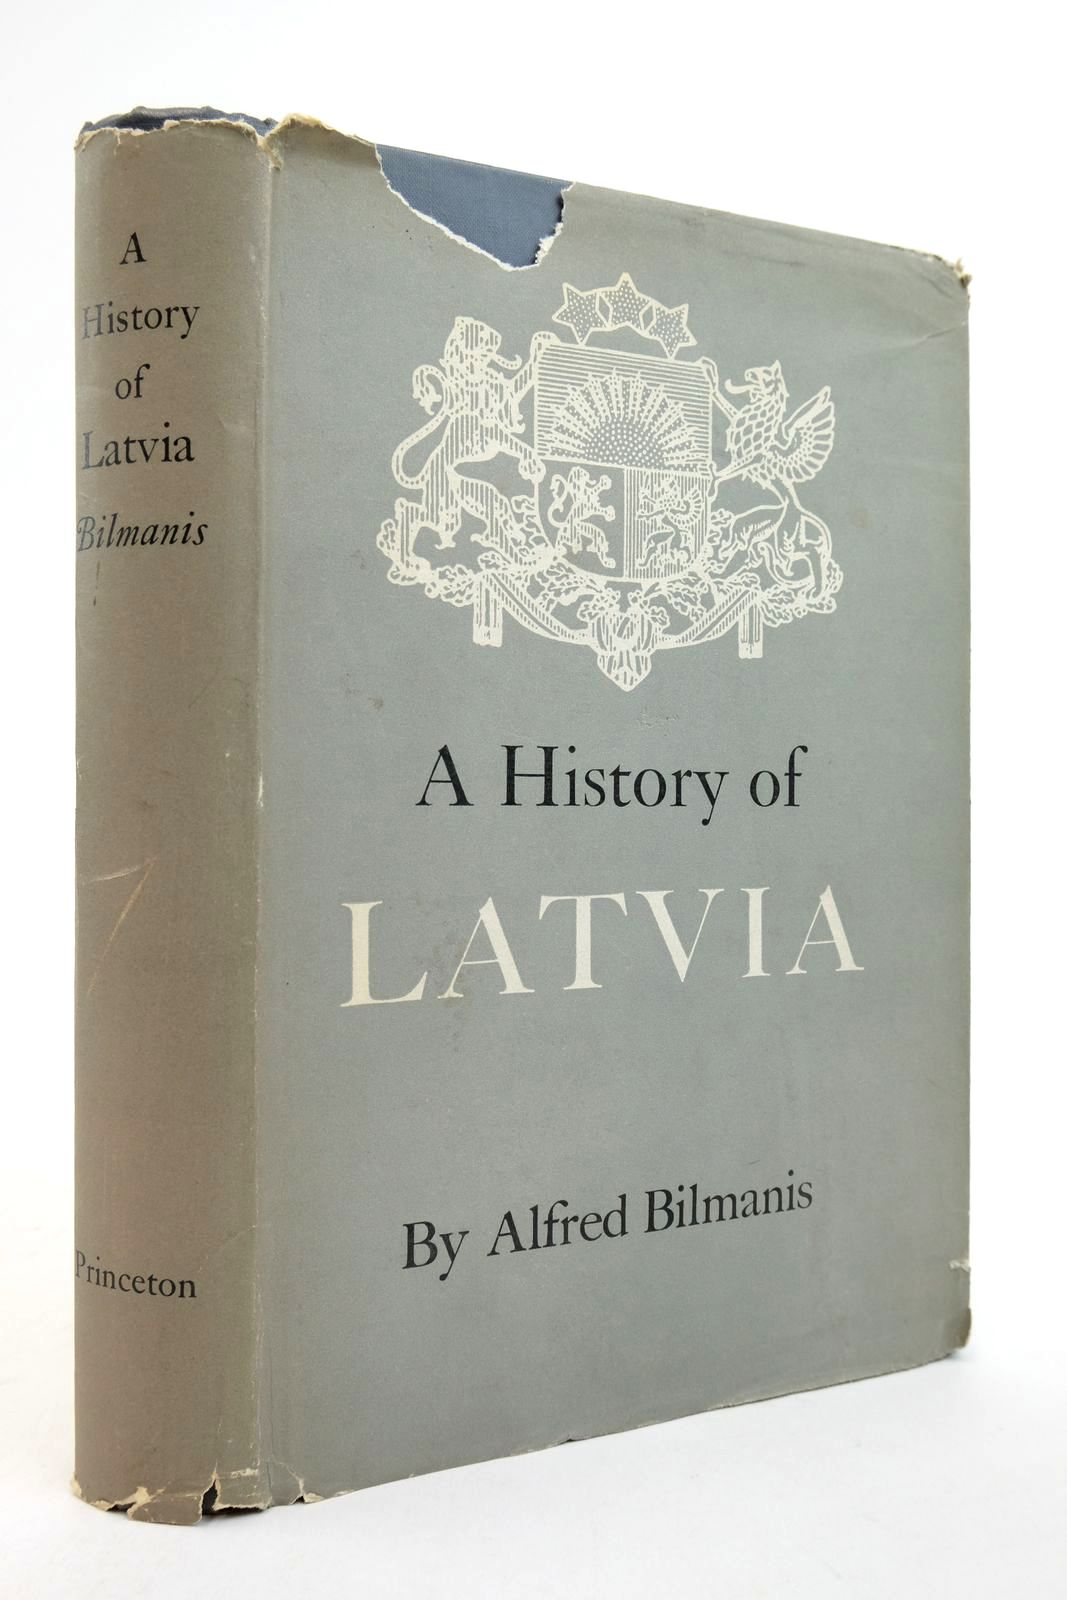 Photo of A HISTORY OF LATVIA written by Bilmanis, Alfred published by Princeton University Press (STOCK CODE: 2139493)  for sale by Stella & Rose's Books